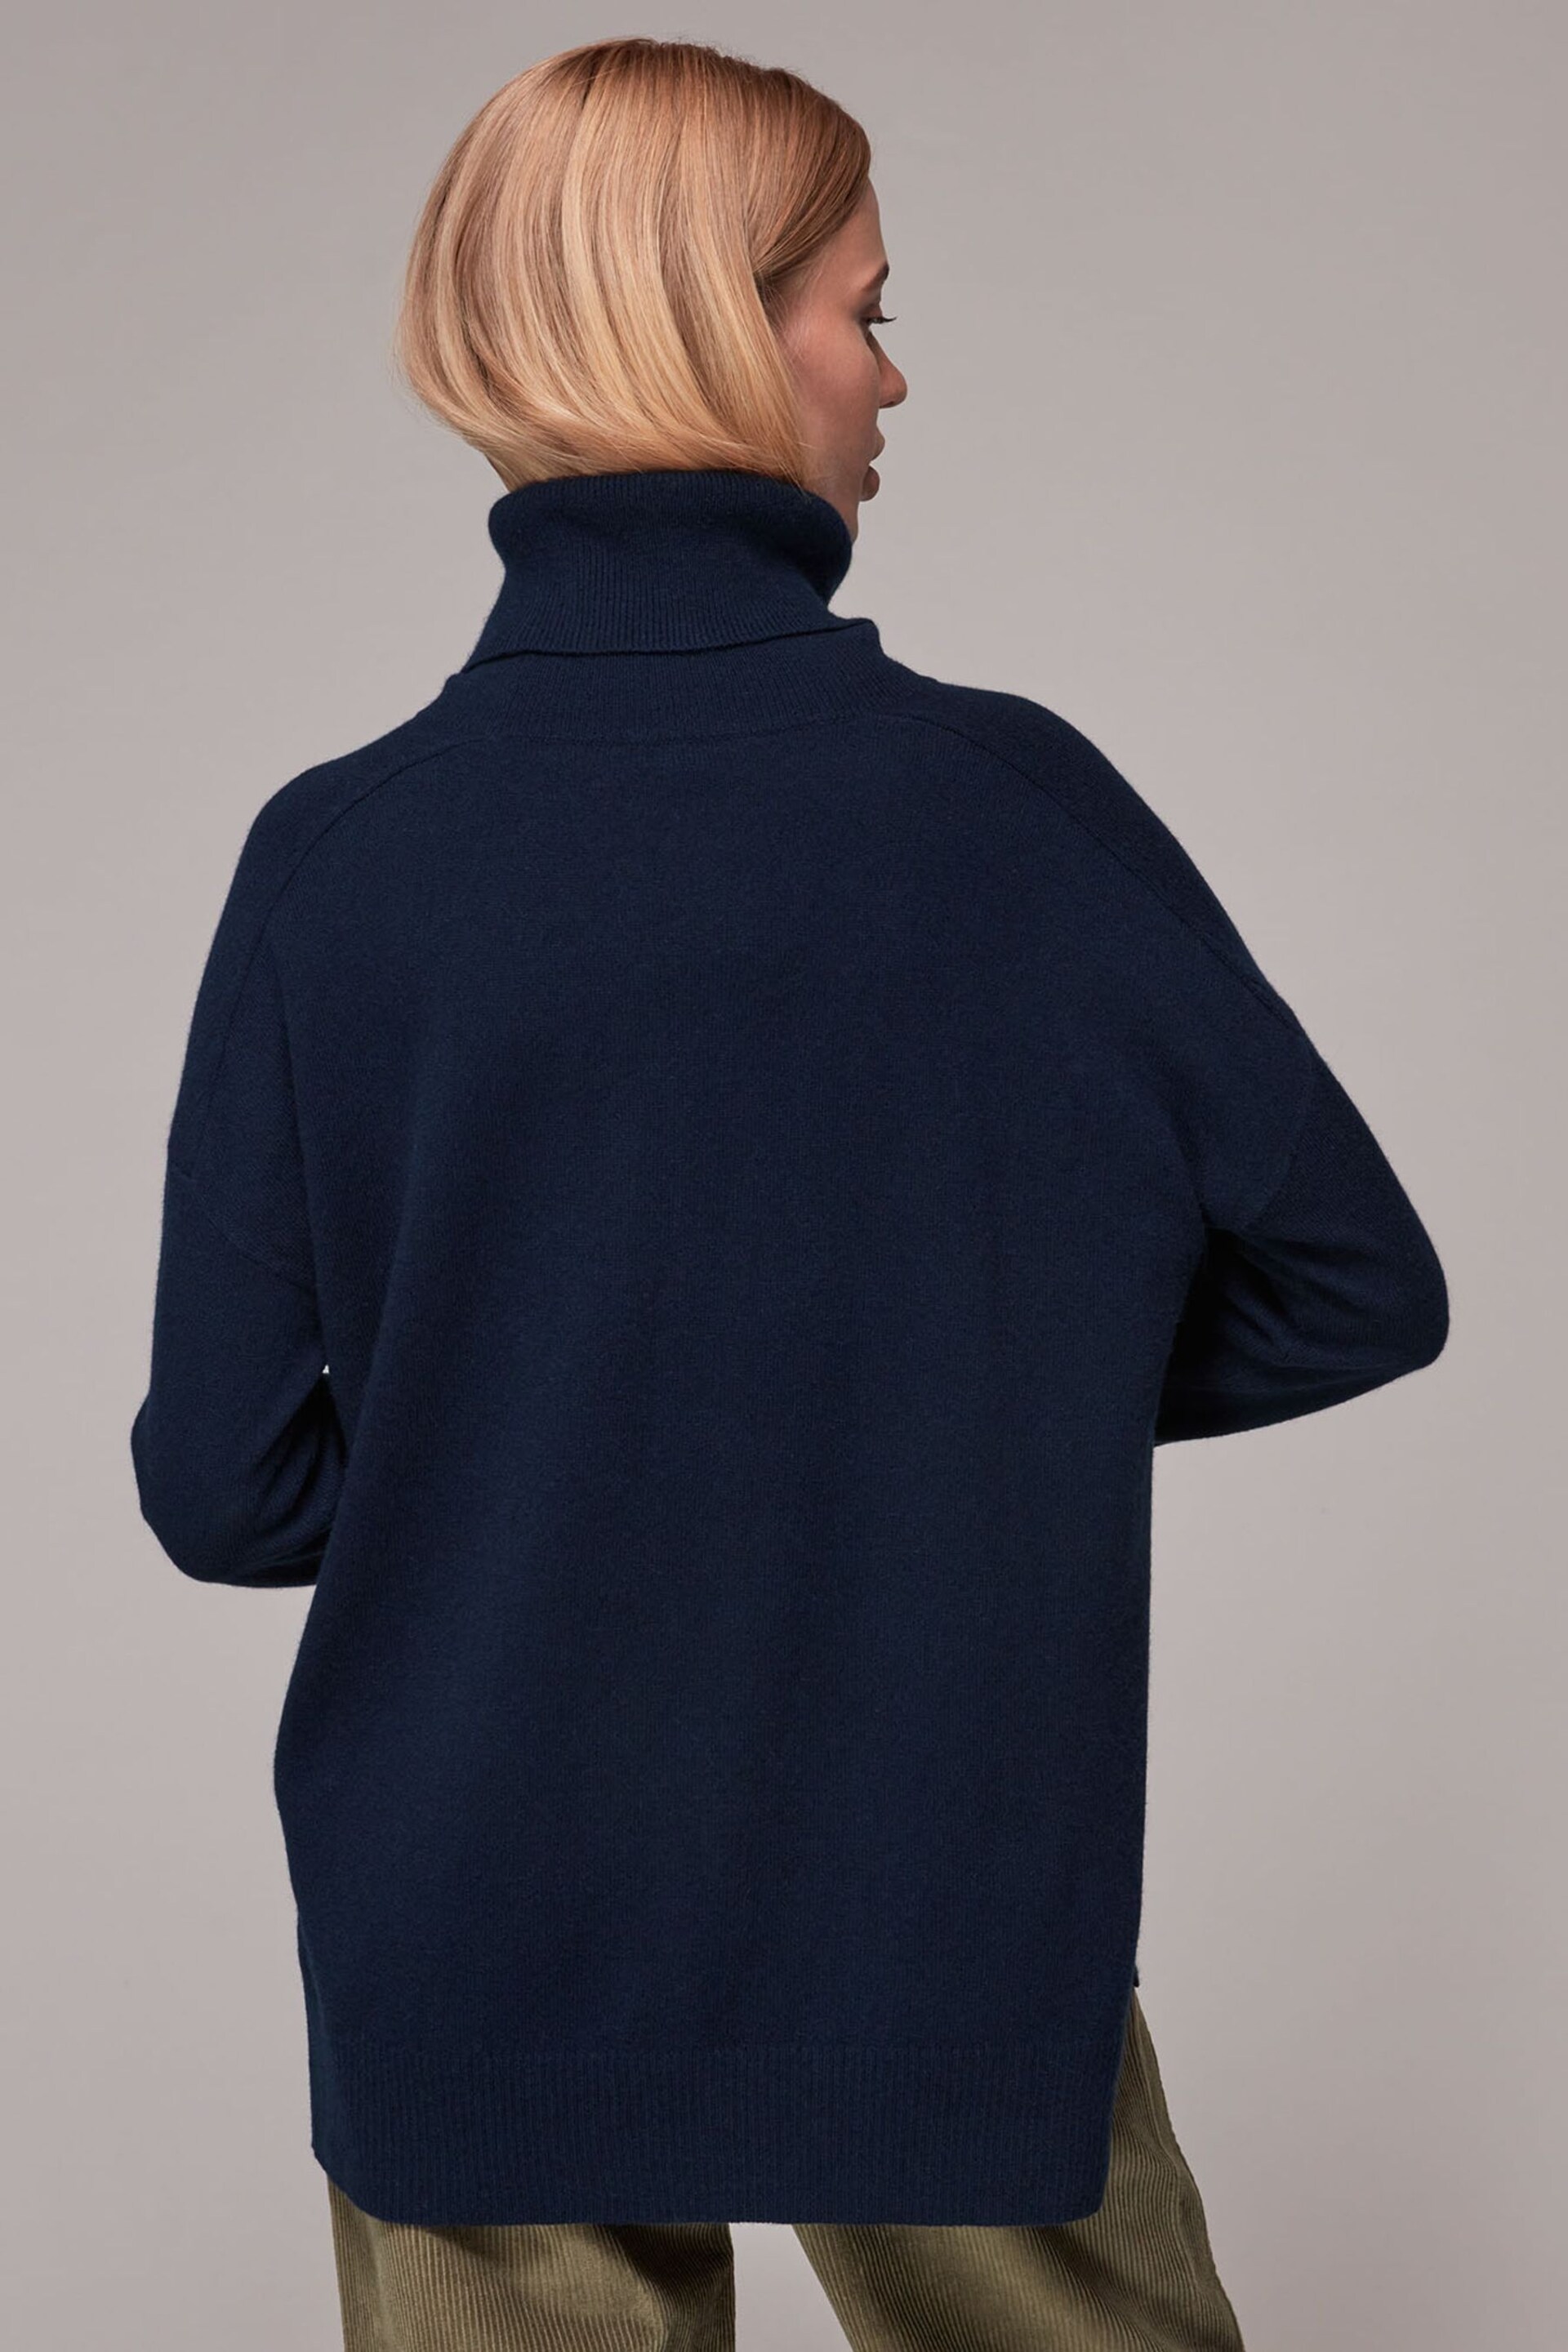 Whistles Cashmere Roll Neck Jumper - Image 2 of 5